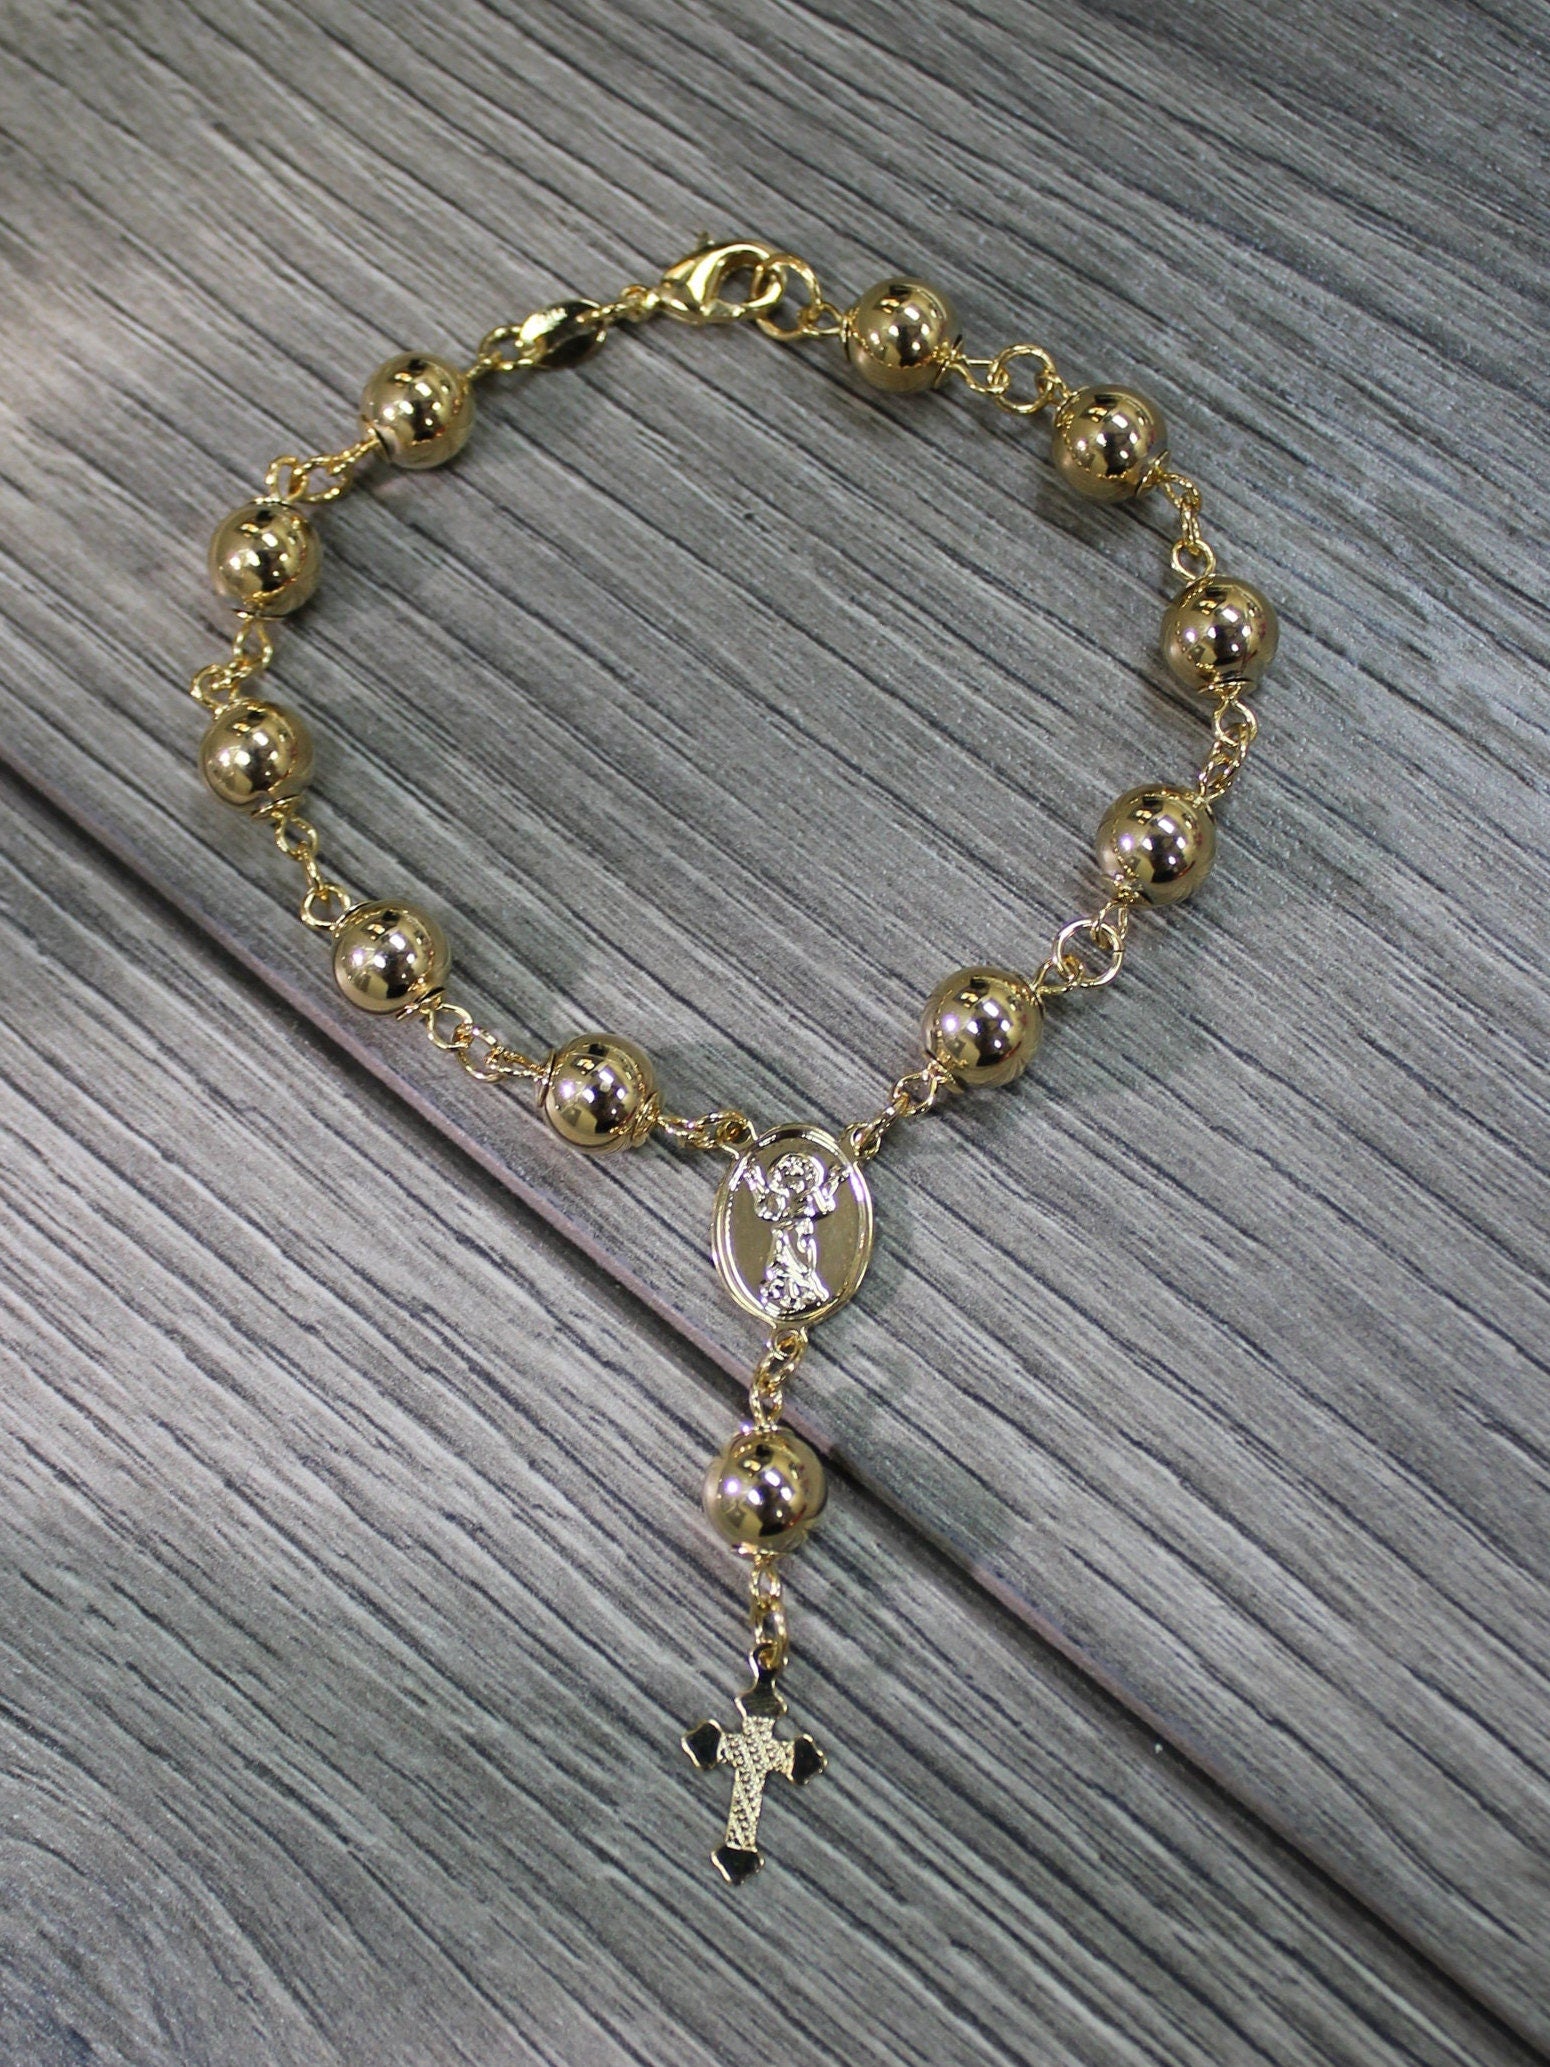 18k Gold Filled Beads Divine Child (El Divino Nino) Rosary Bracelet, Religious Protection, Wholesale Jewelry Supplies